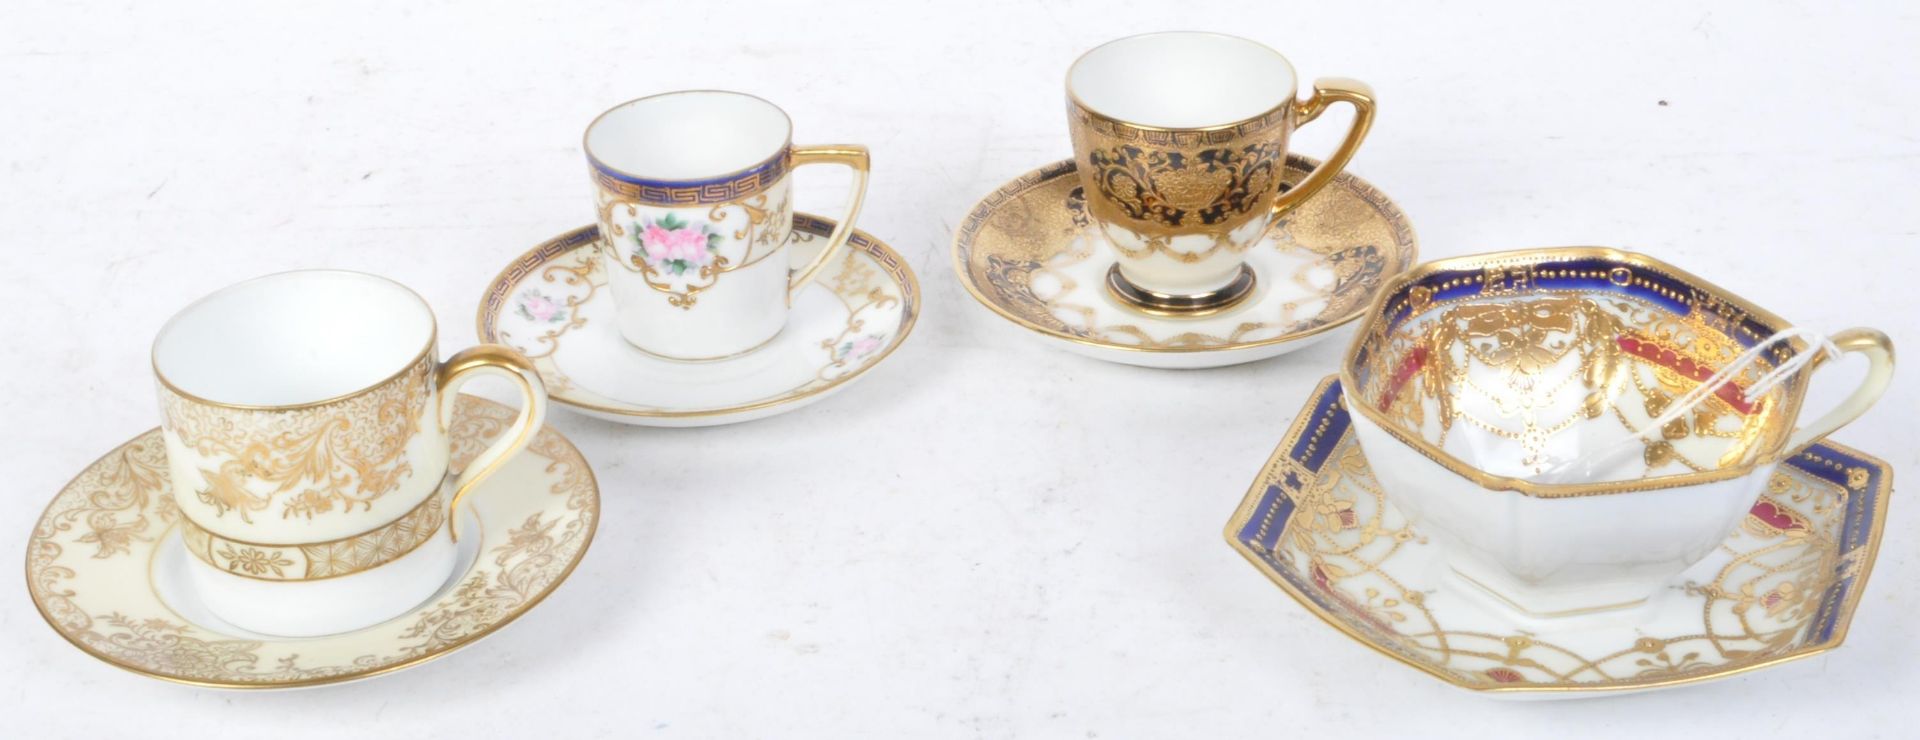 ASSORTMENT OF EARLY 20TH CENTURY NORITAKE PORCELAIN CUPS & SAUCERS